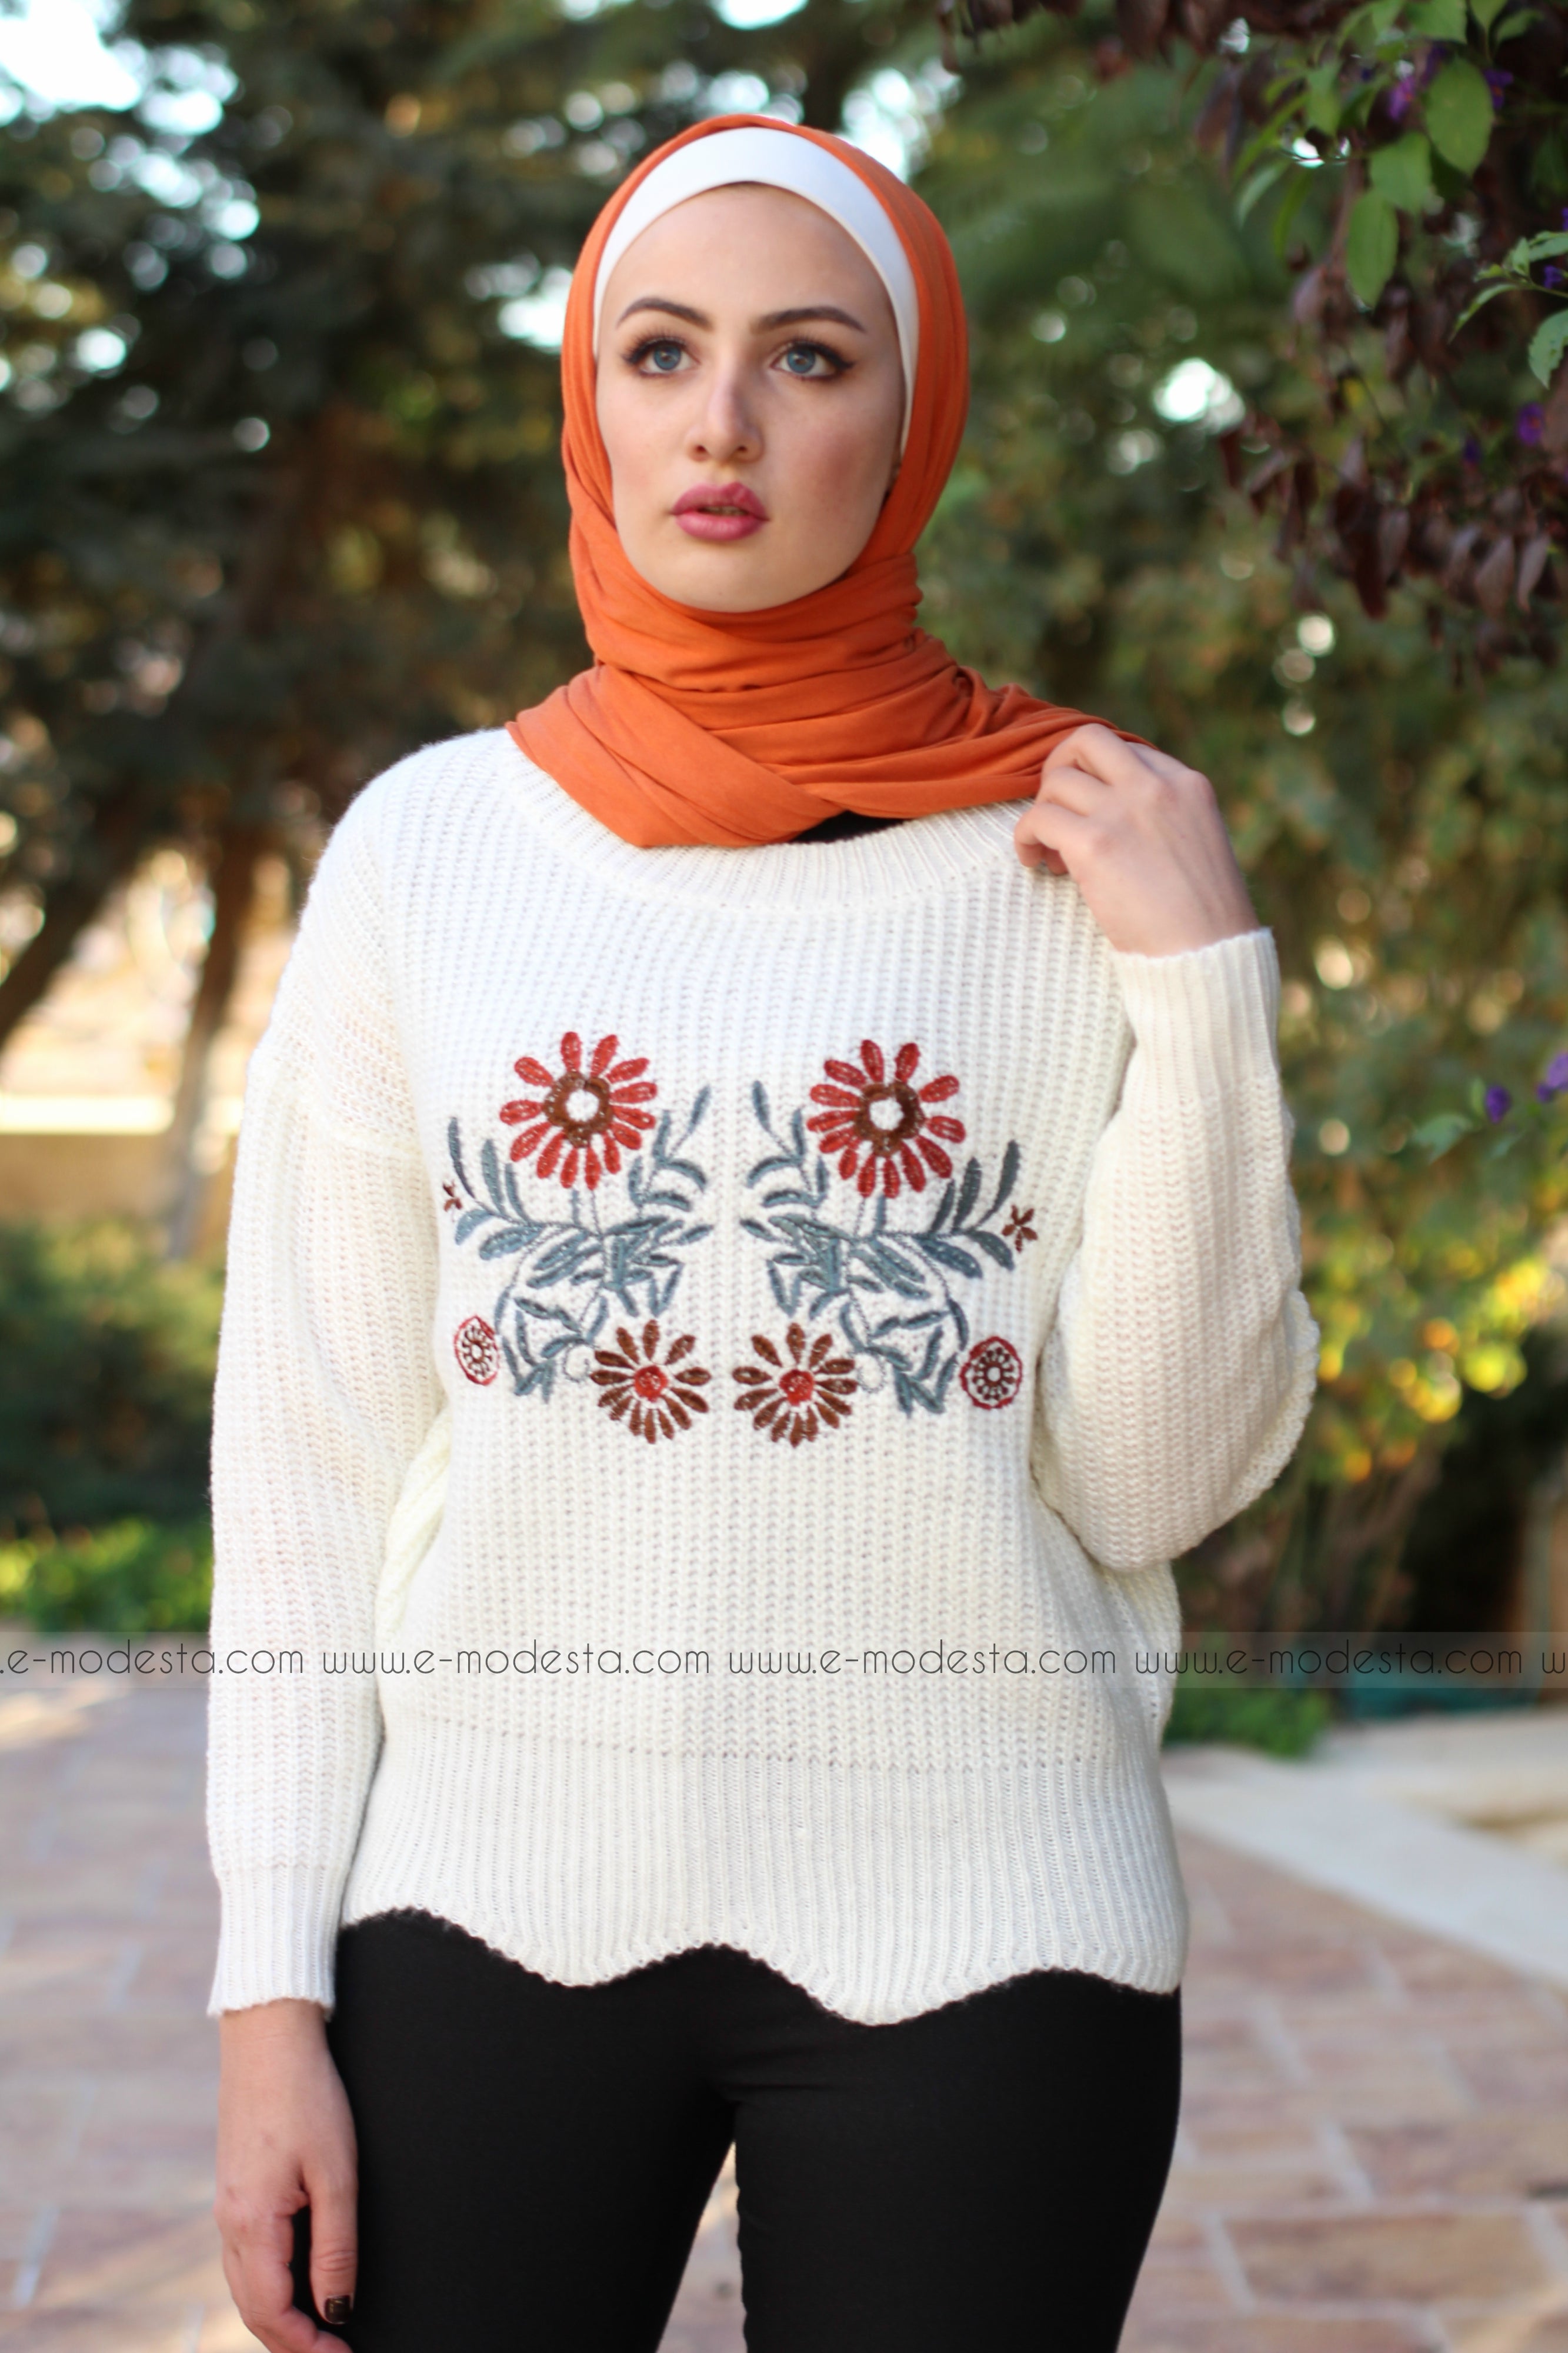 SALE Embroidery Floral Thick Wool Sweater - E-Modesta